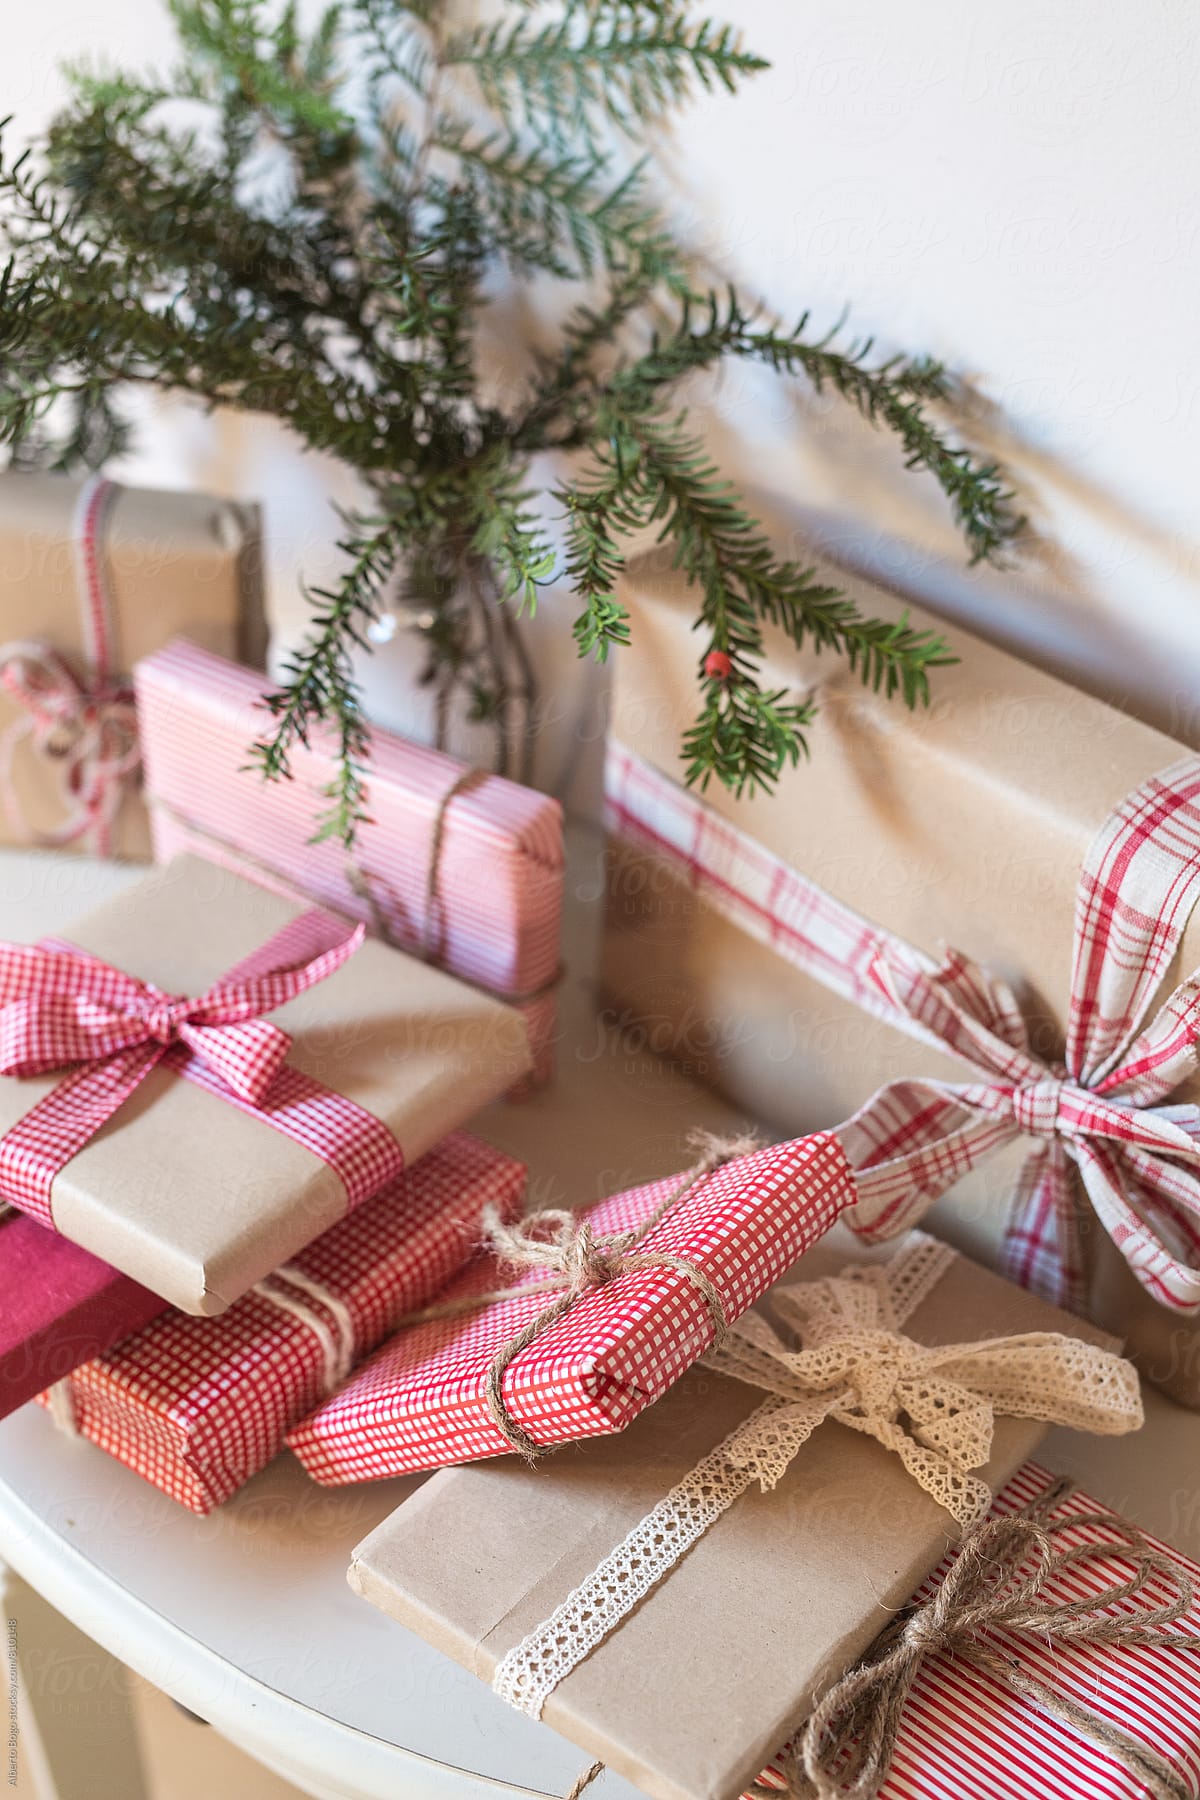 Christmas Gifts With Natural Packing On The Home Table